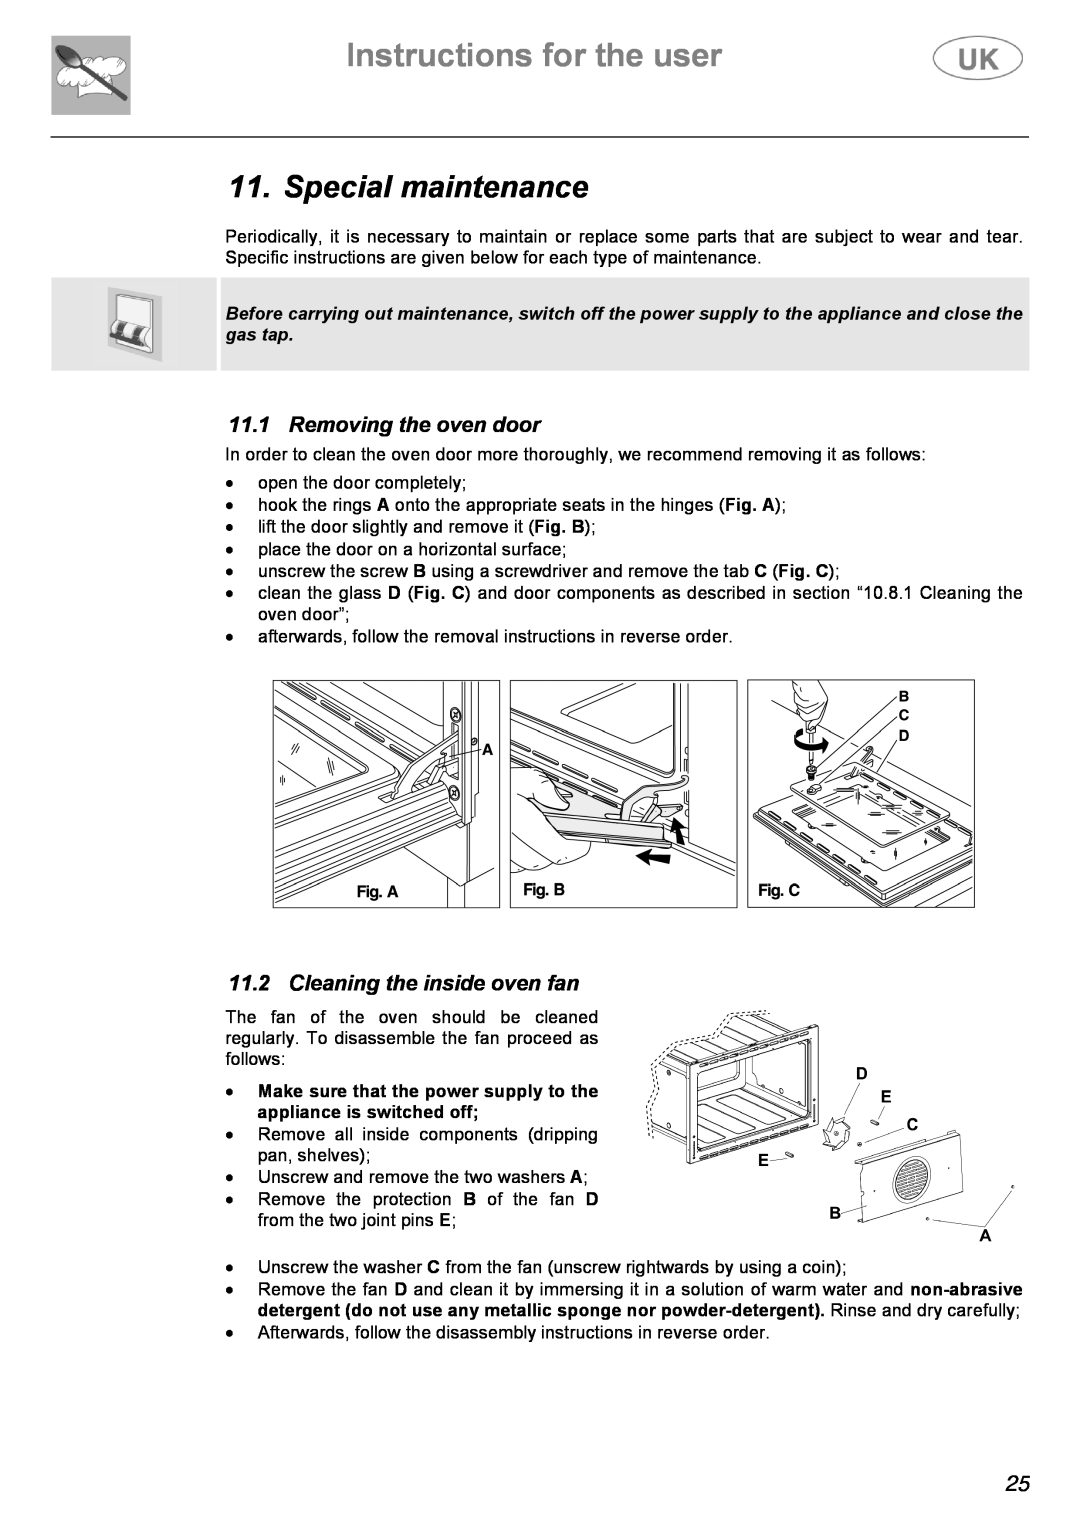 Electrolux C41022GN Special maintenance, Removing the oven door, Cleaning the inside oven fan, Instructions for the user 